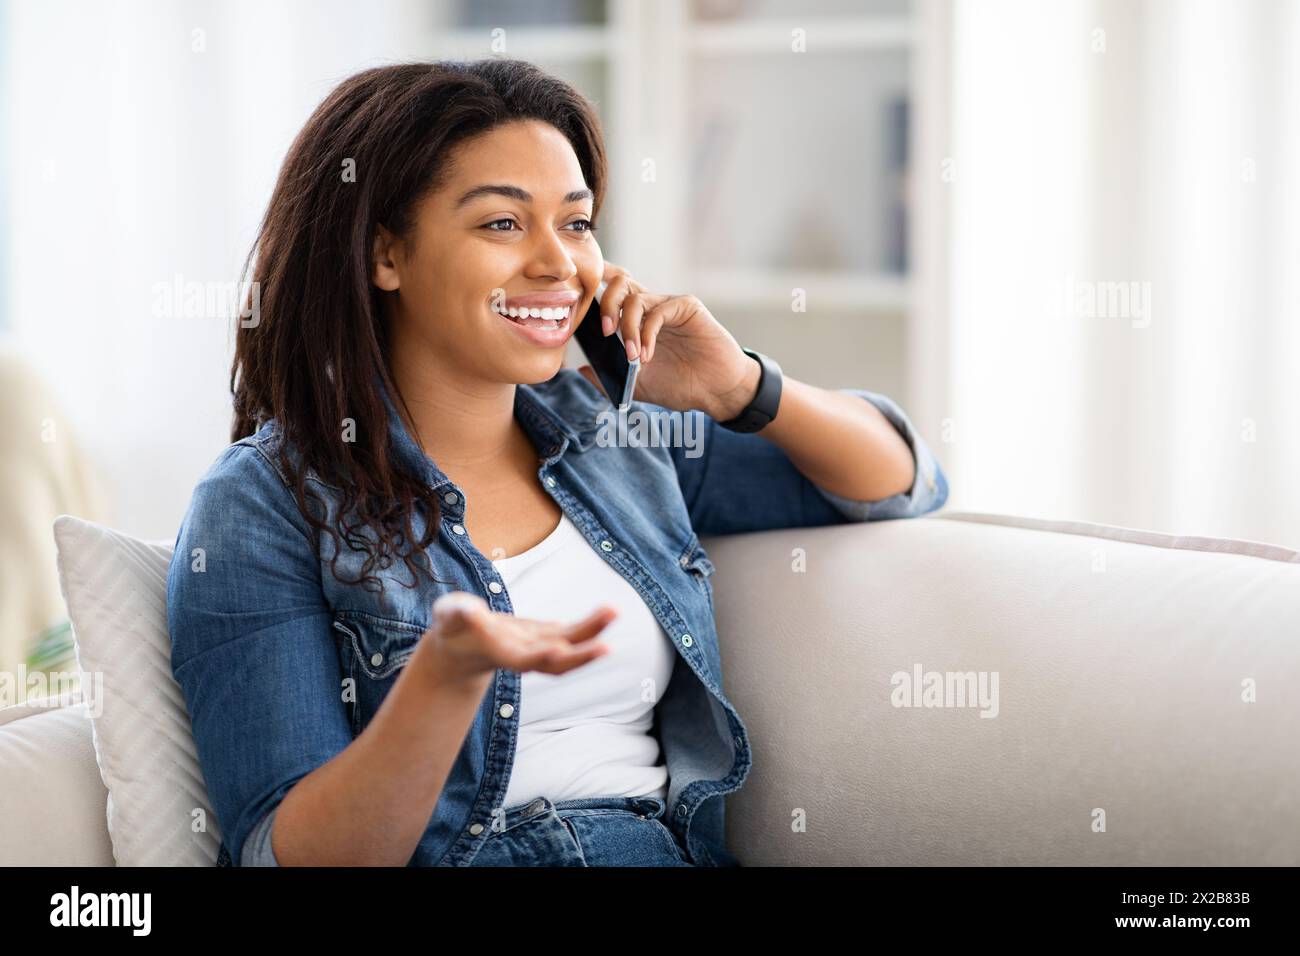 Woman Sitting on Couch Talking on Cell Phone Stock Photo